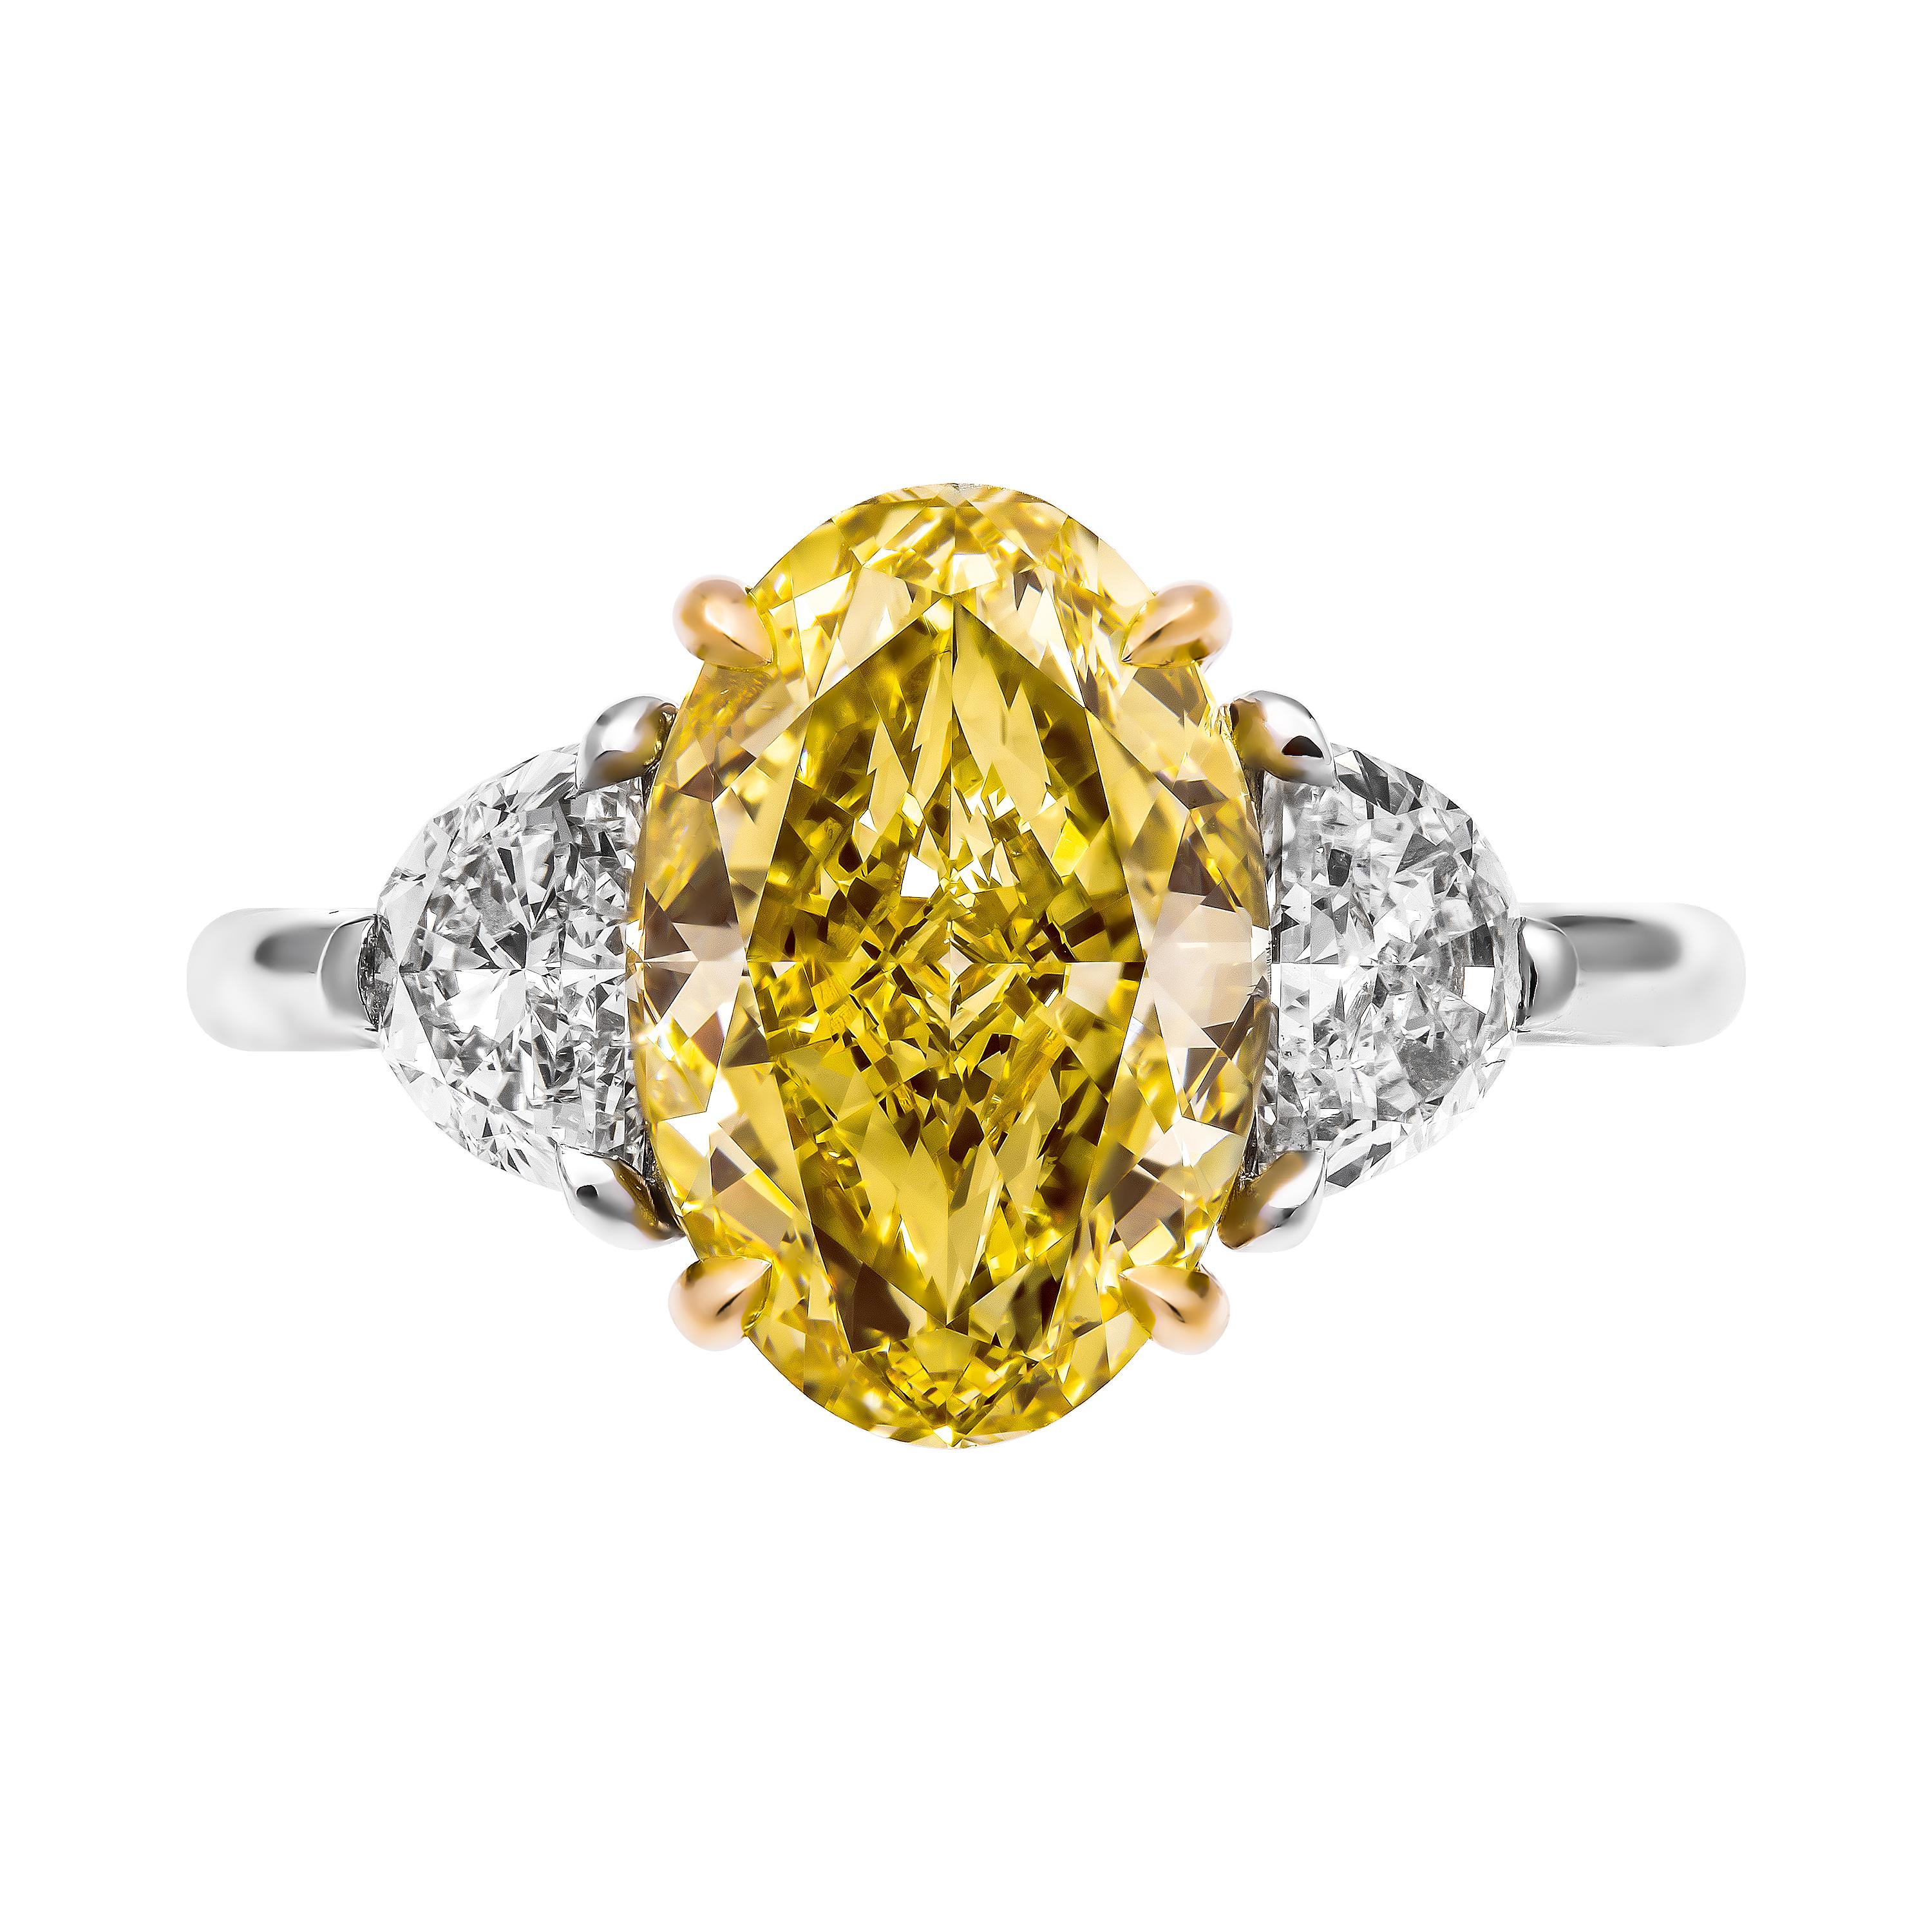 Mounted in handmade customwire setting featuring 18K Yellow Gold & Platinum 950, perfect mounting to compliment the beauty of this exotic stone!
Setting features stunningly delicate work,  2 Halfmoon shape side stones totaling 0.93ct G color VS2